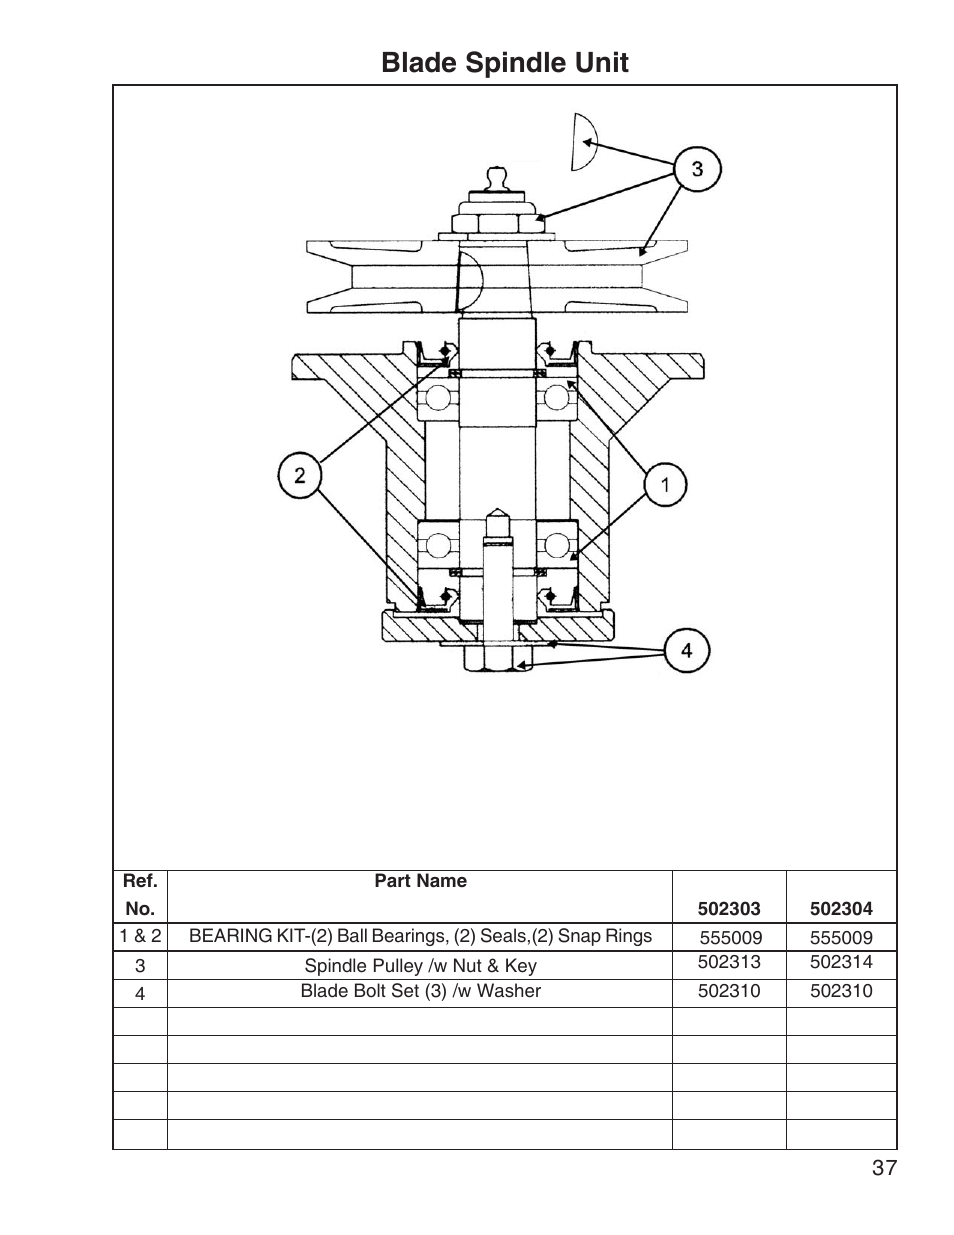 Blade spindle unit | King Kutter Free Floating User Manual | Page 37 / 44